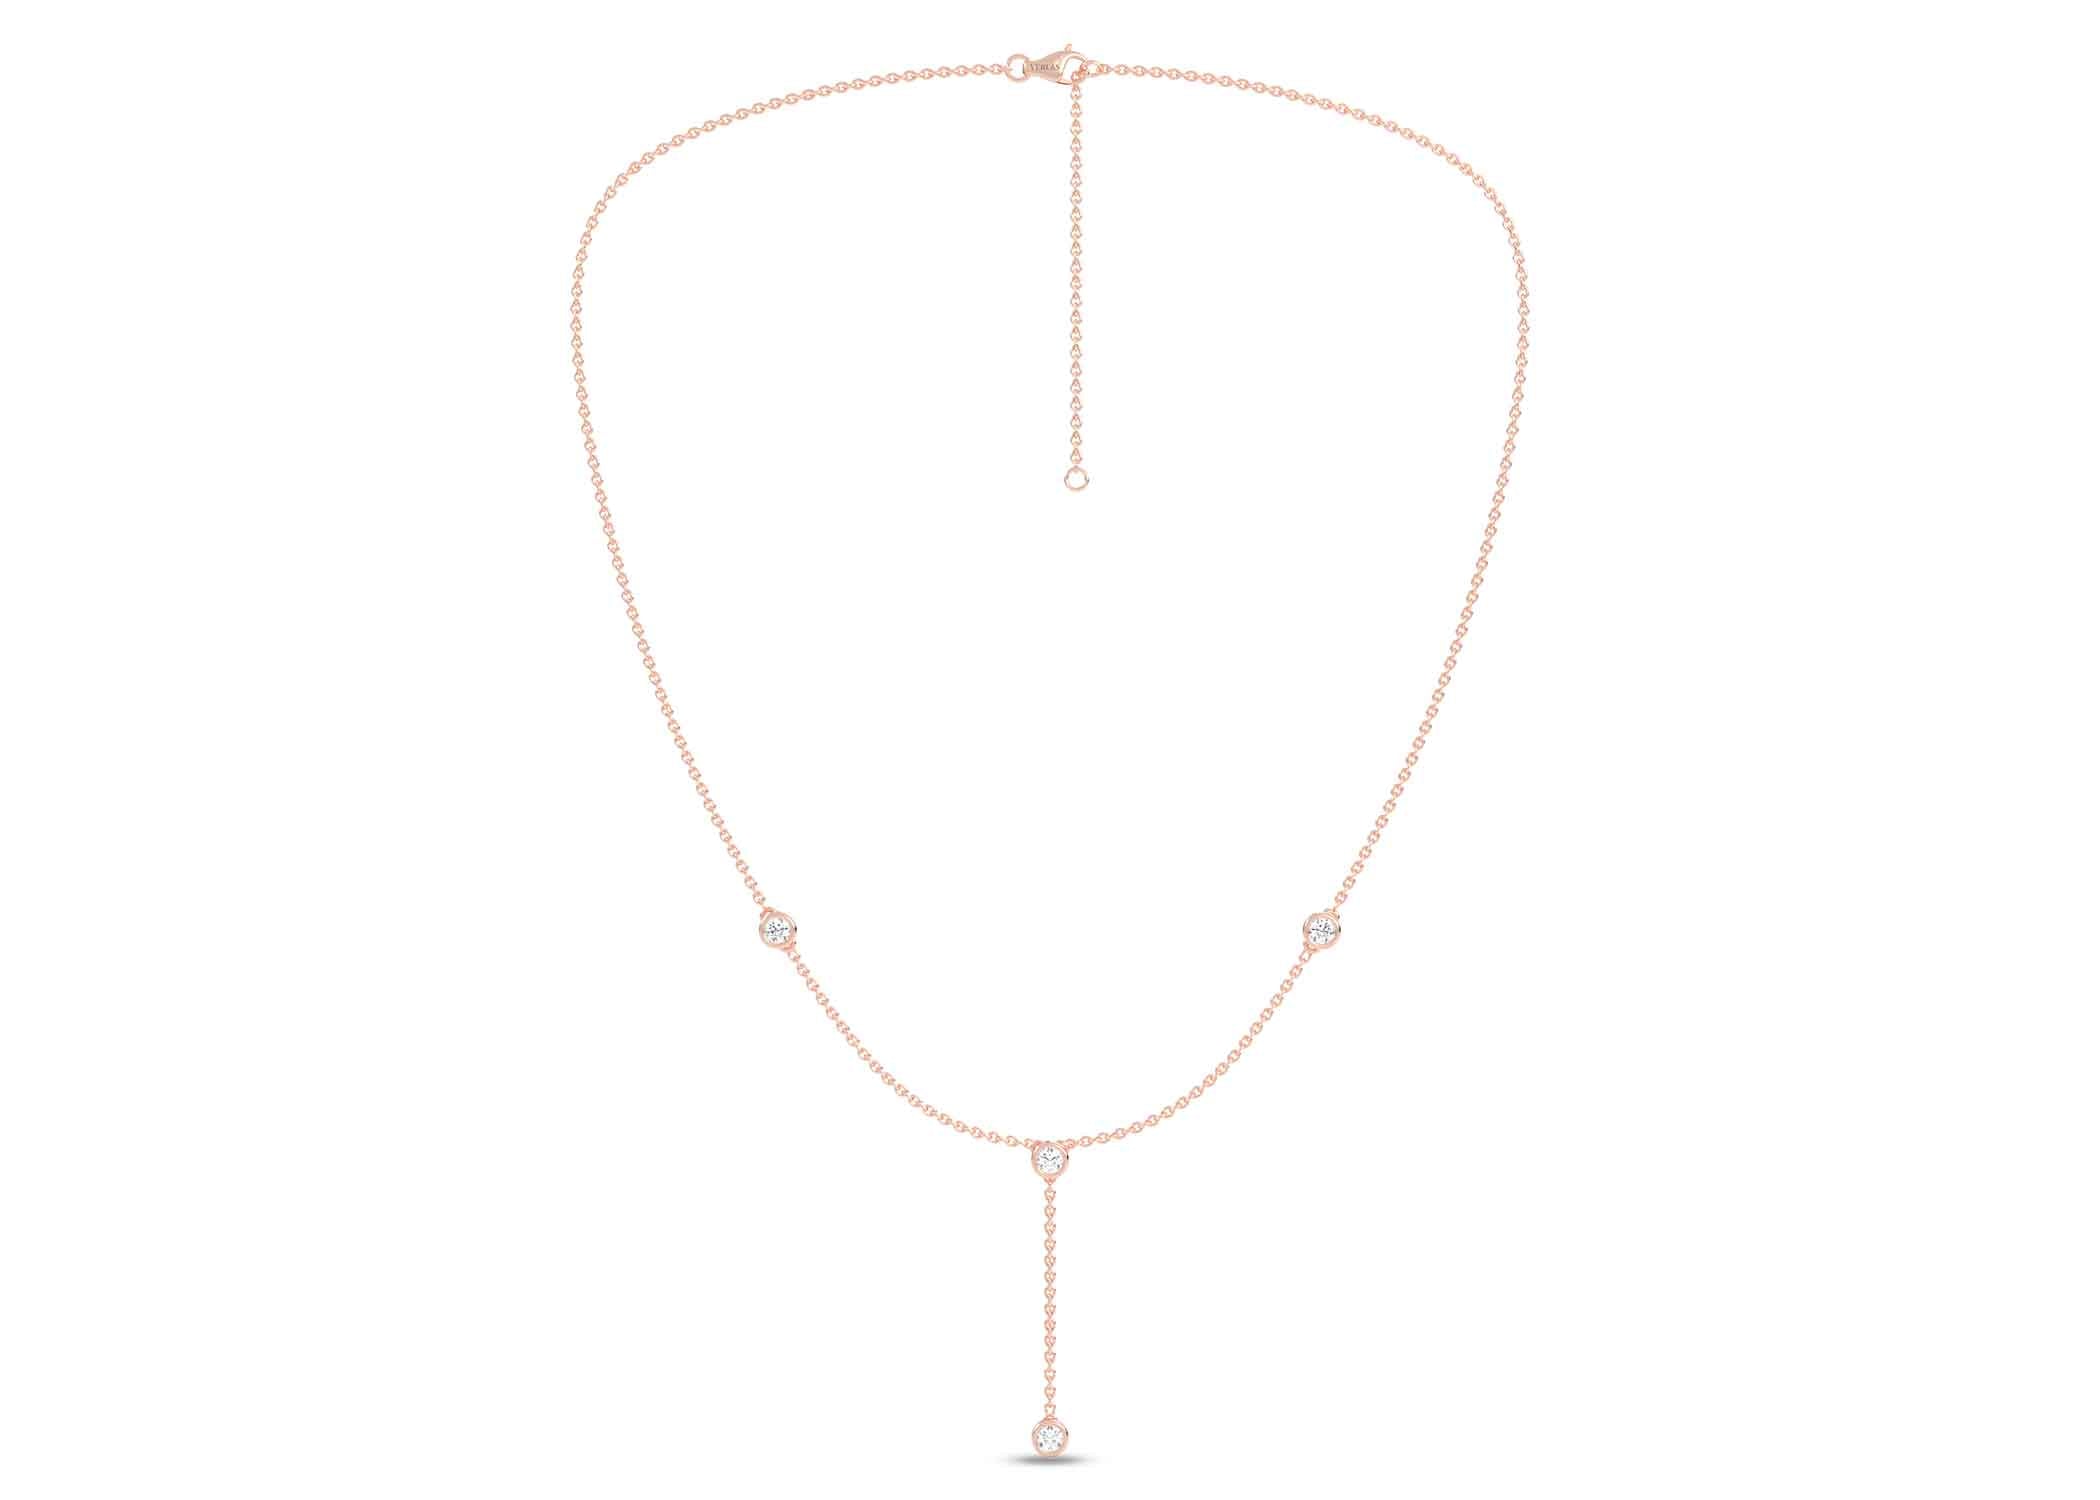 Encompassing Round Stationed Y Necklace Replica